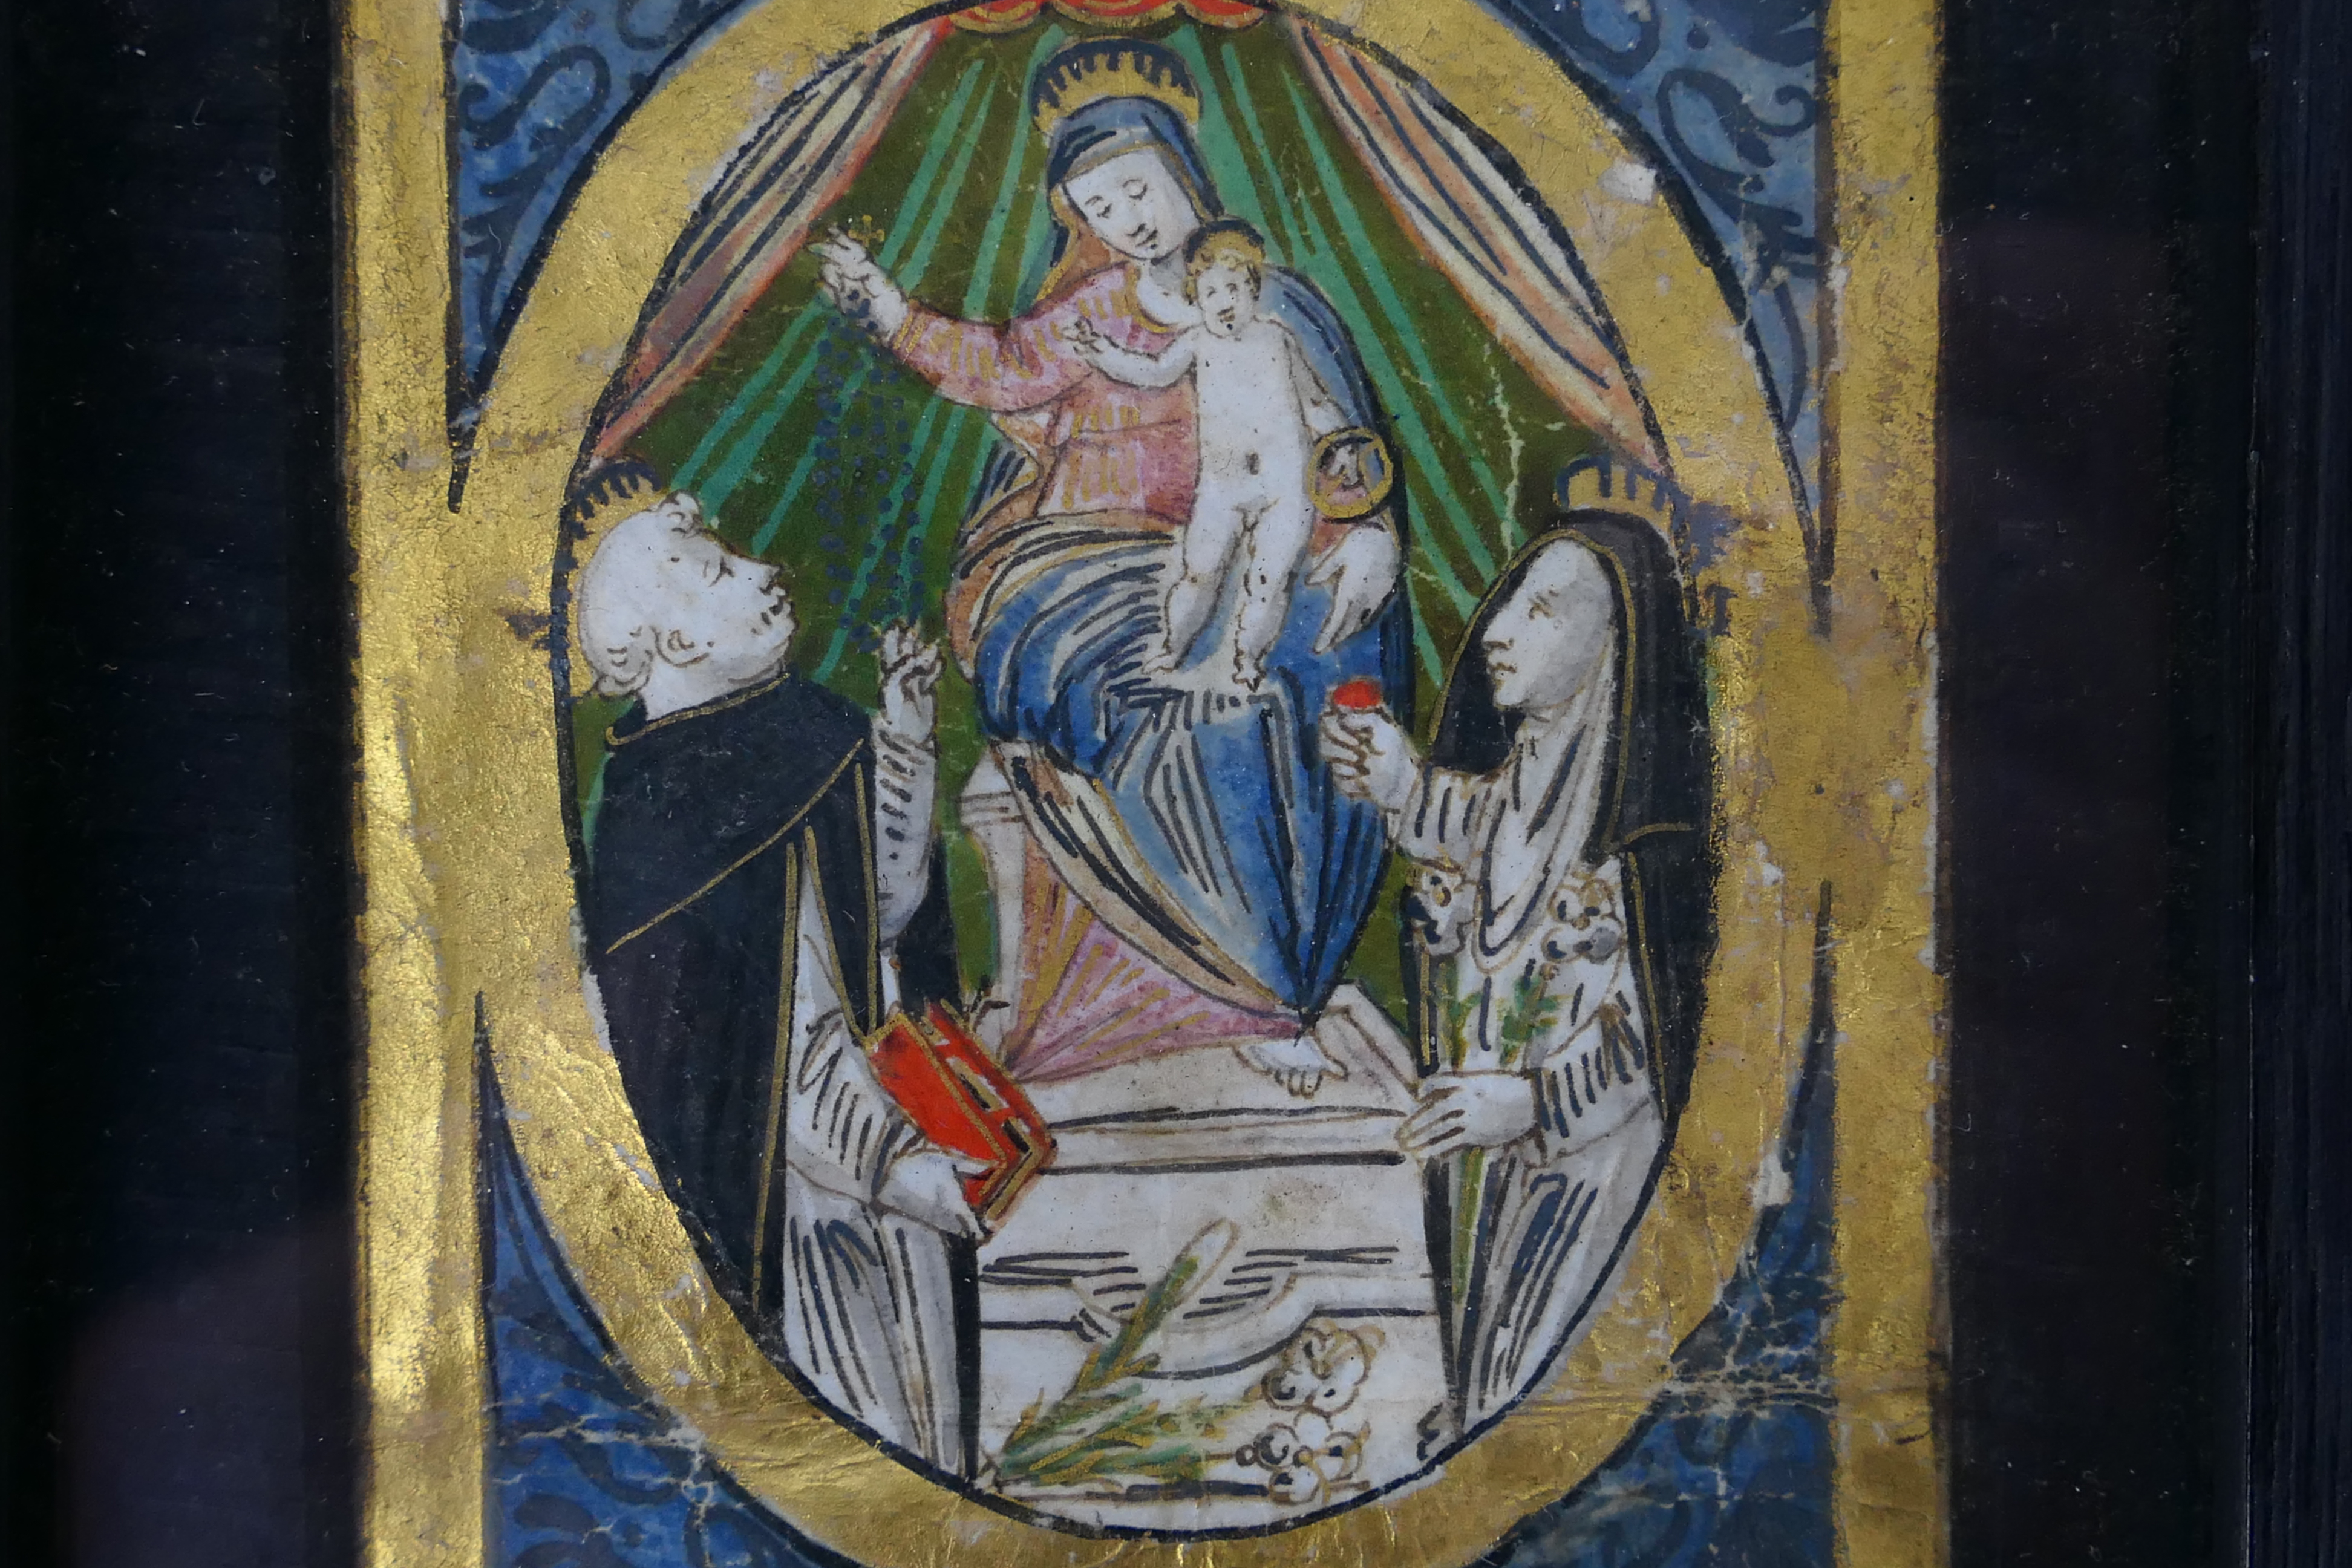 Antique illumination fragment from a religious text depicting the Madonna and child with figures - Image 3 of 6